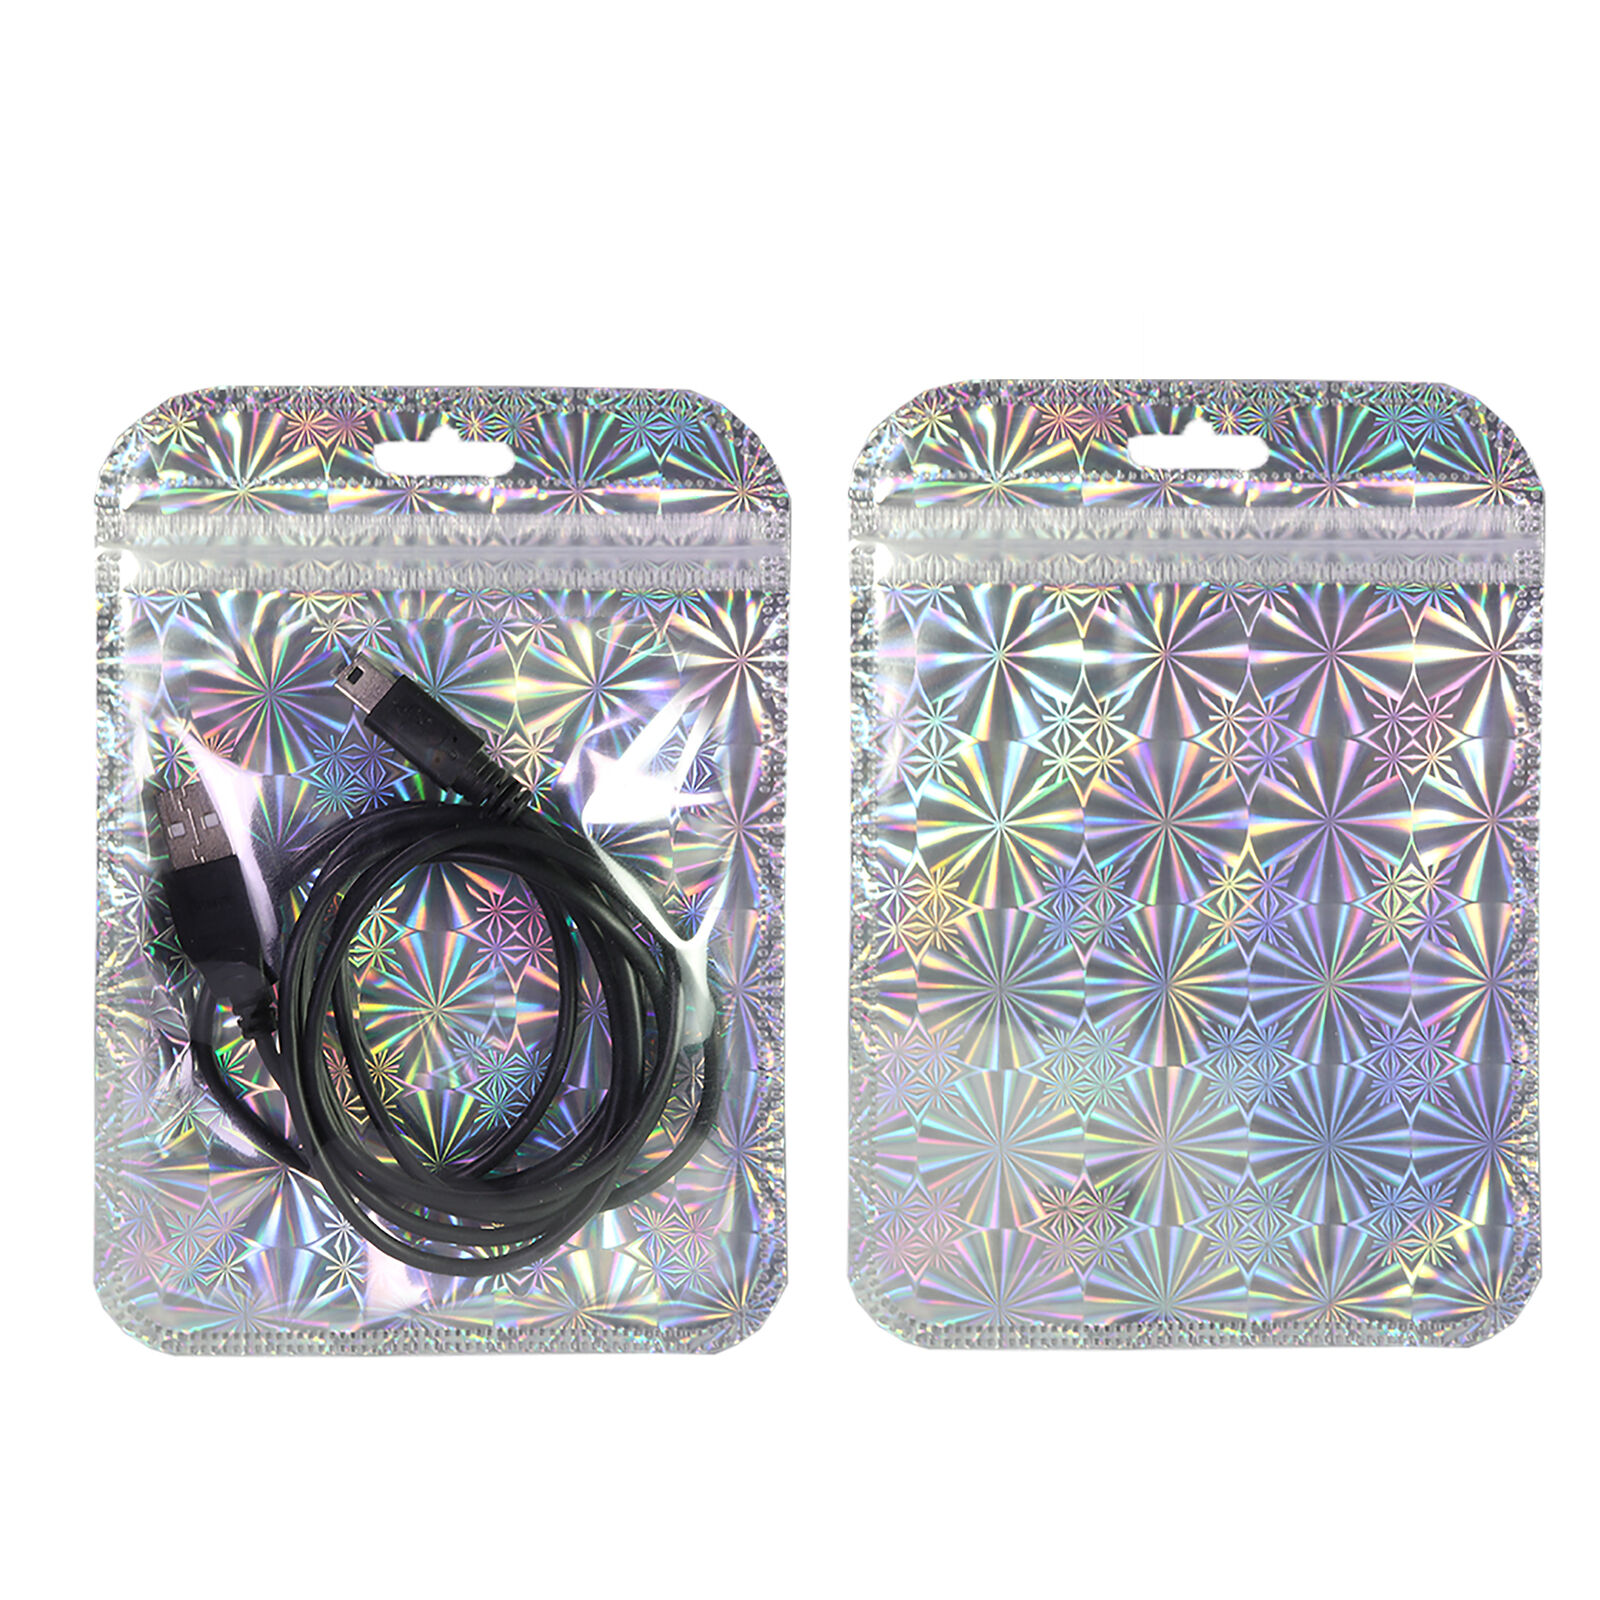 Holographic Silver Waterproof Zipper Bags for Samsung Galaxy Smartphone Chargers